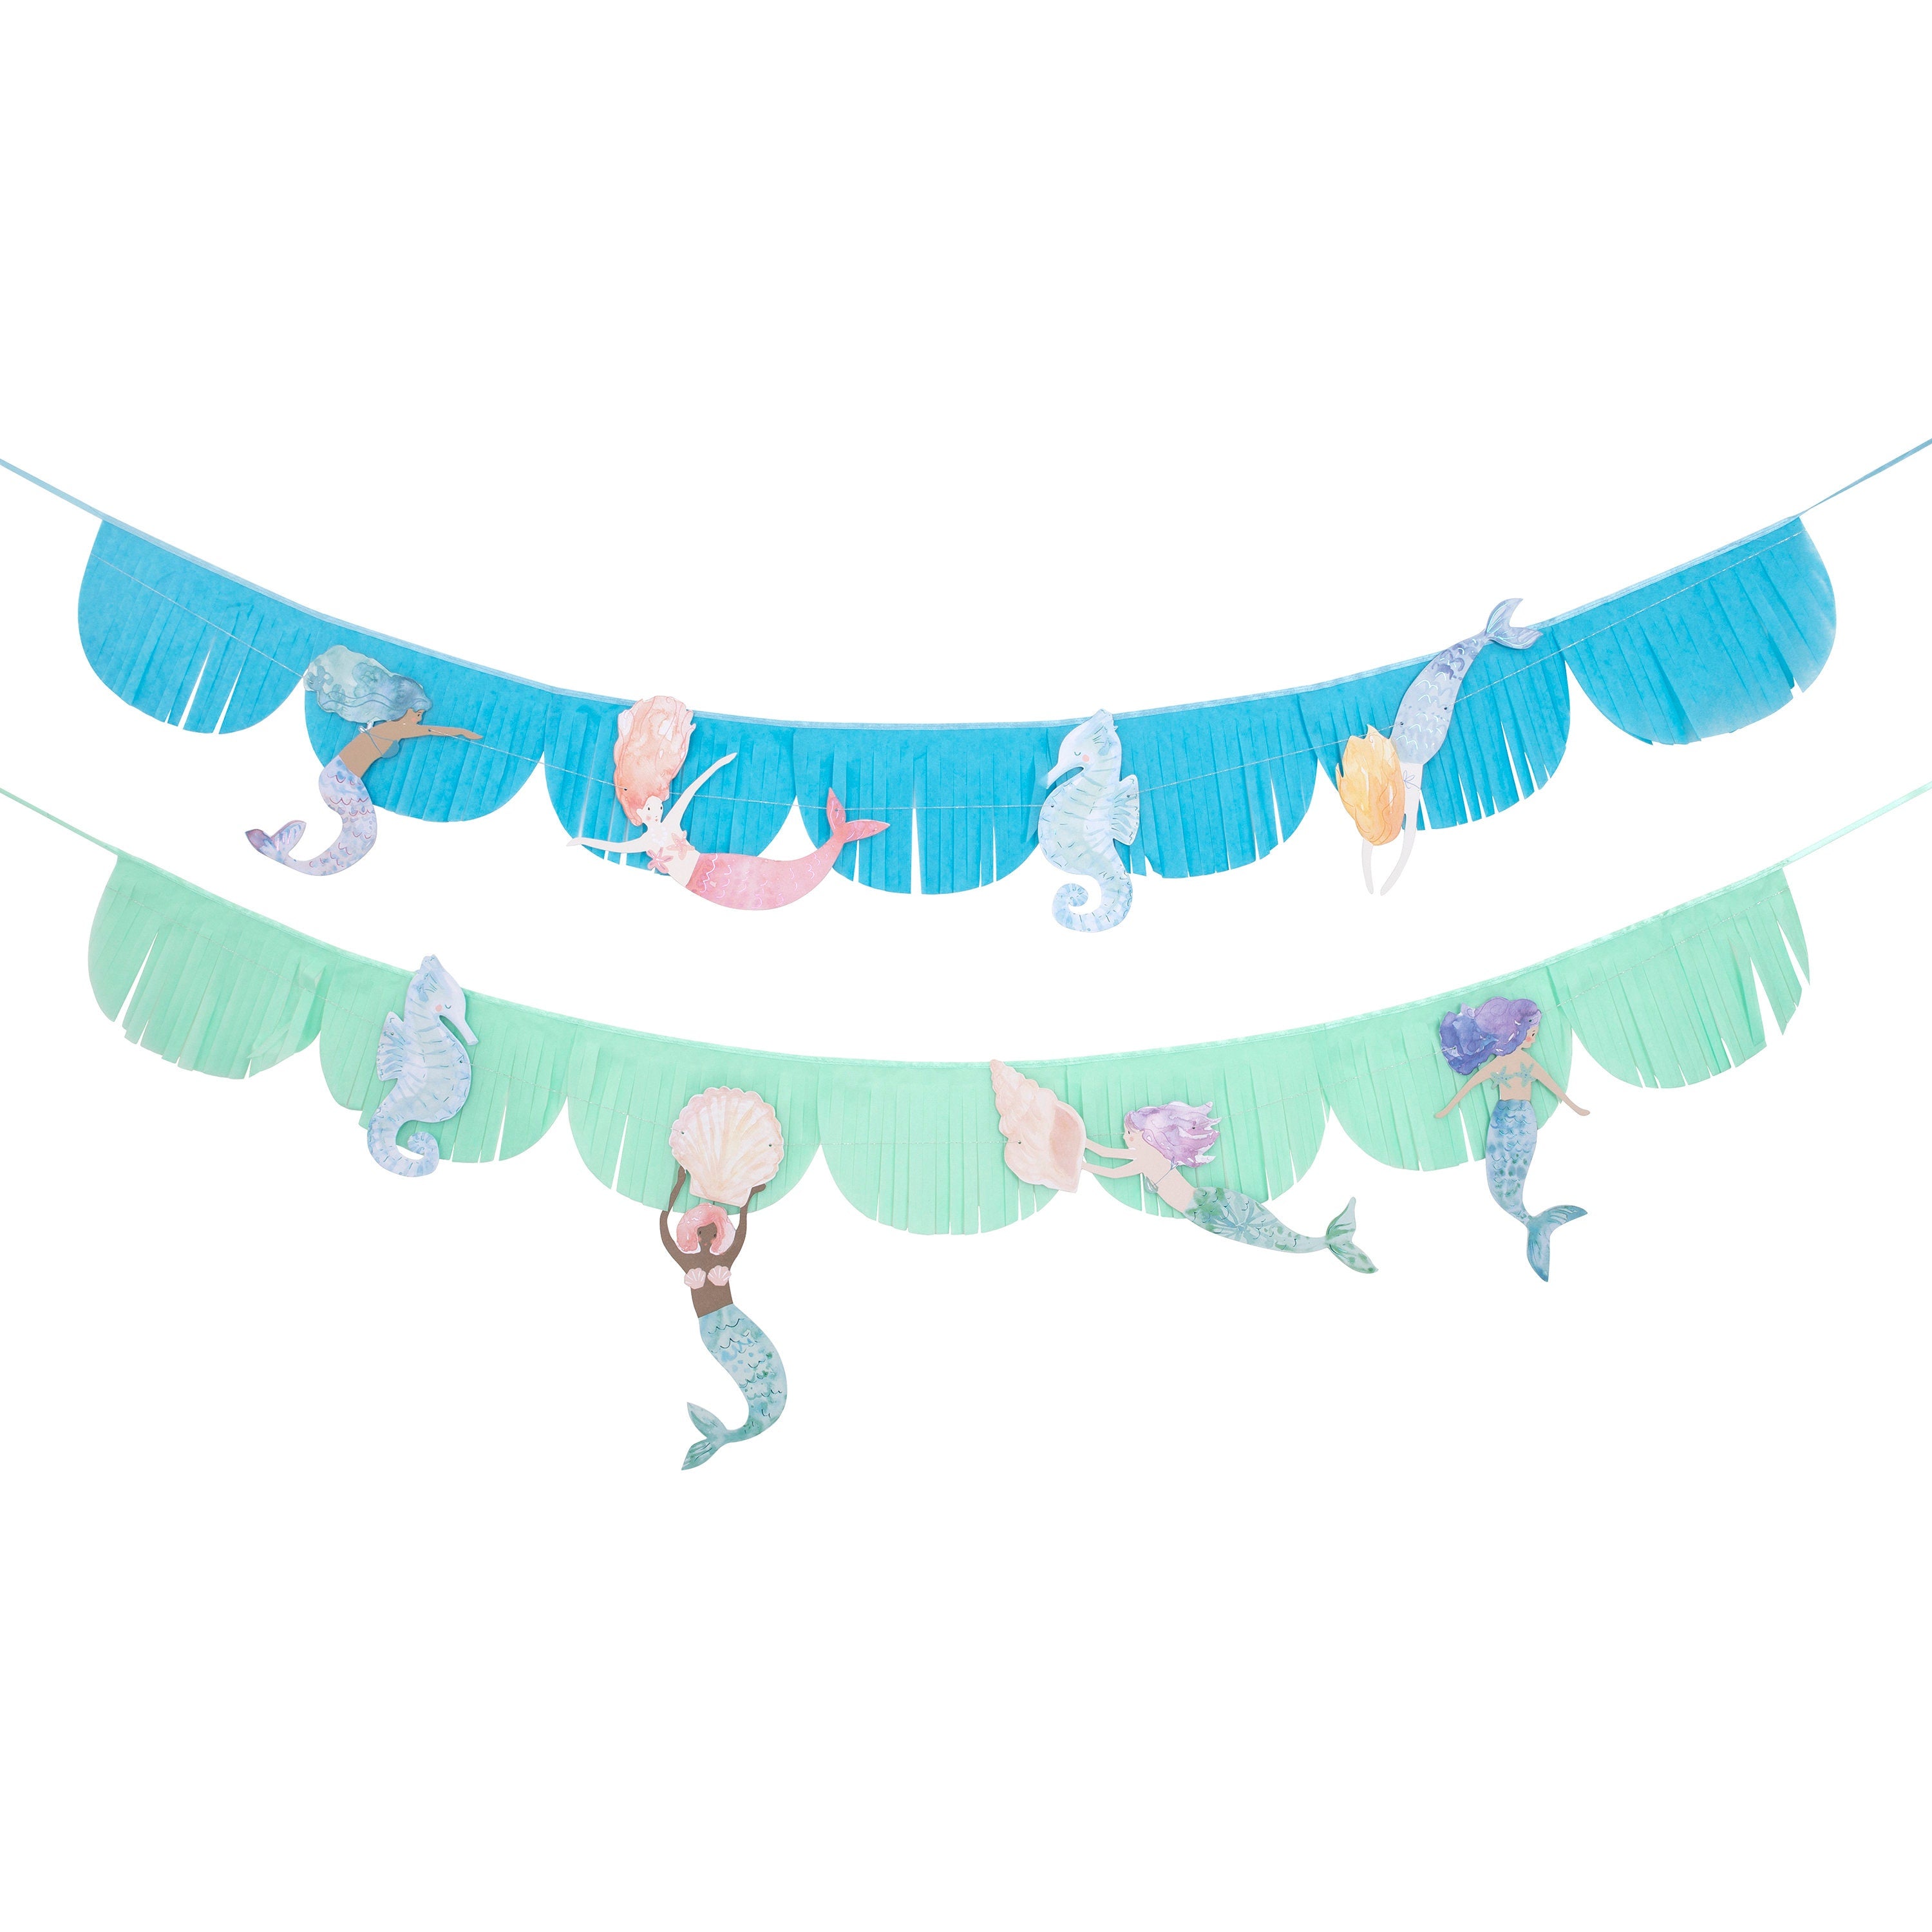 Mermaid Garland | Mermaid Party Decoration - Mermaid Backdrop - Mermaid Party - Mermaid Birthday Decoration - Under the Sea Party Decoration